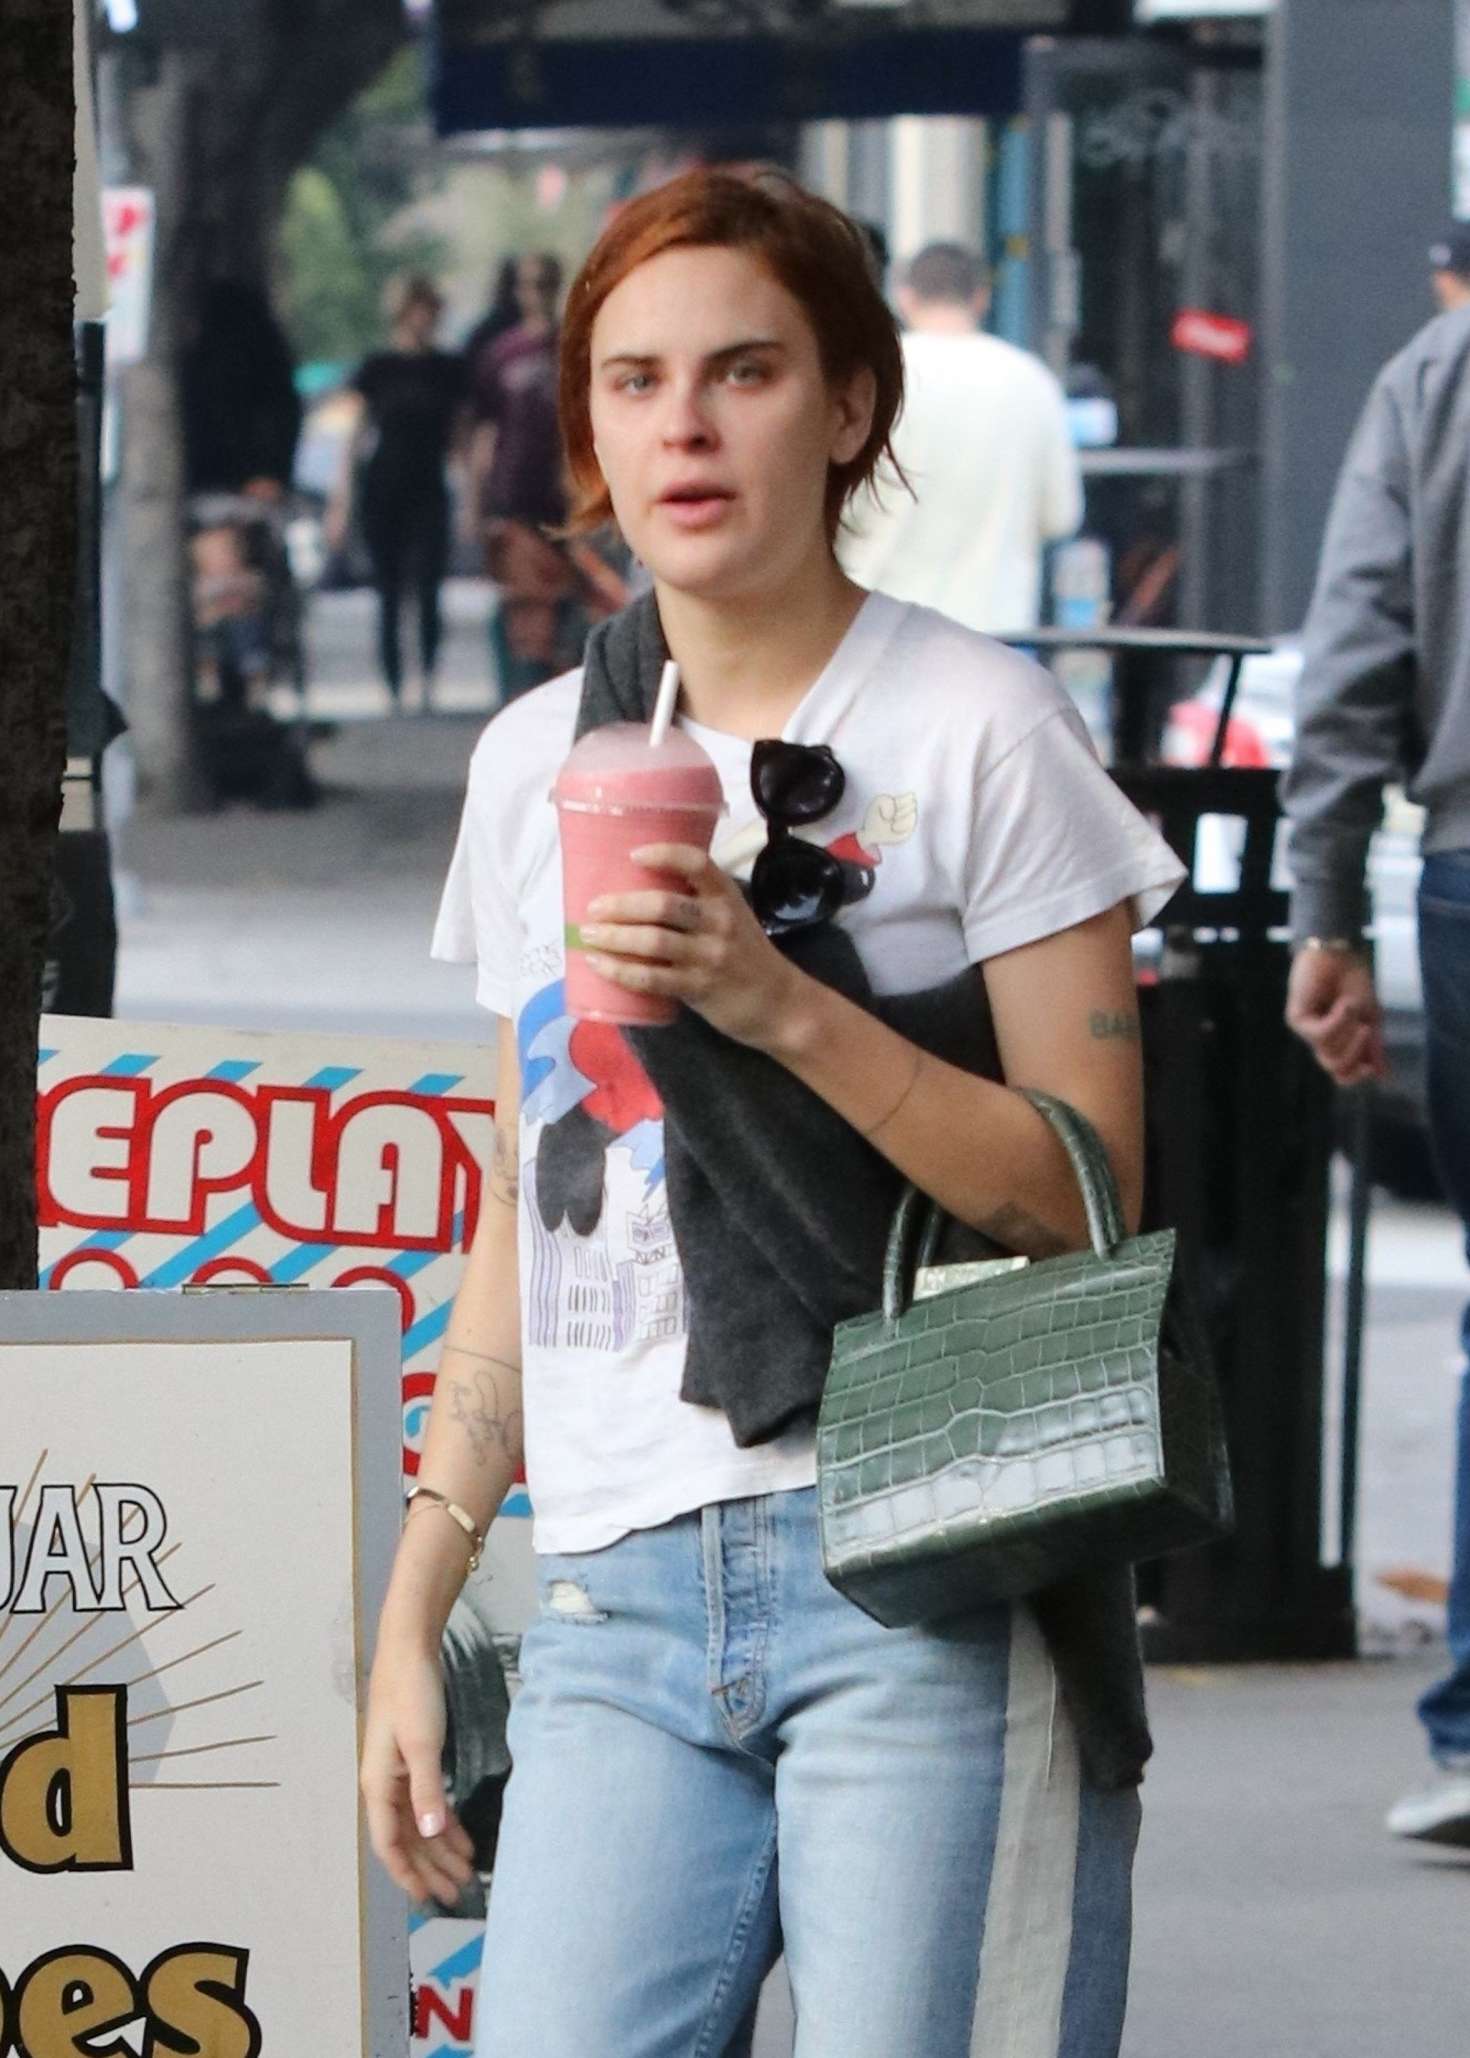 Tallulah and Scout Willis â€“ Shopping in Los Angeles